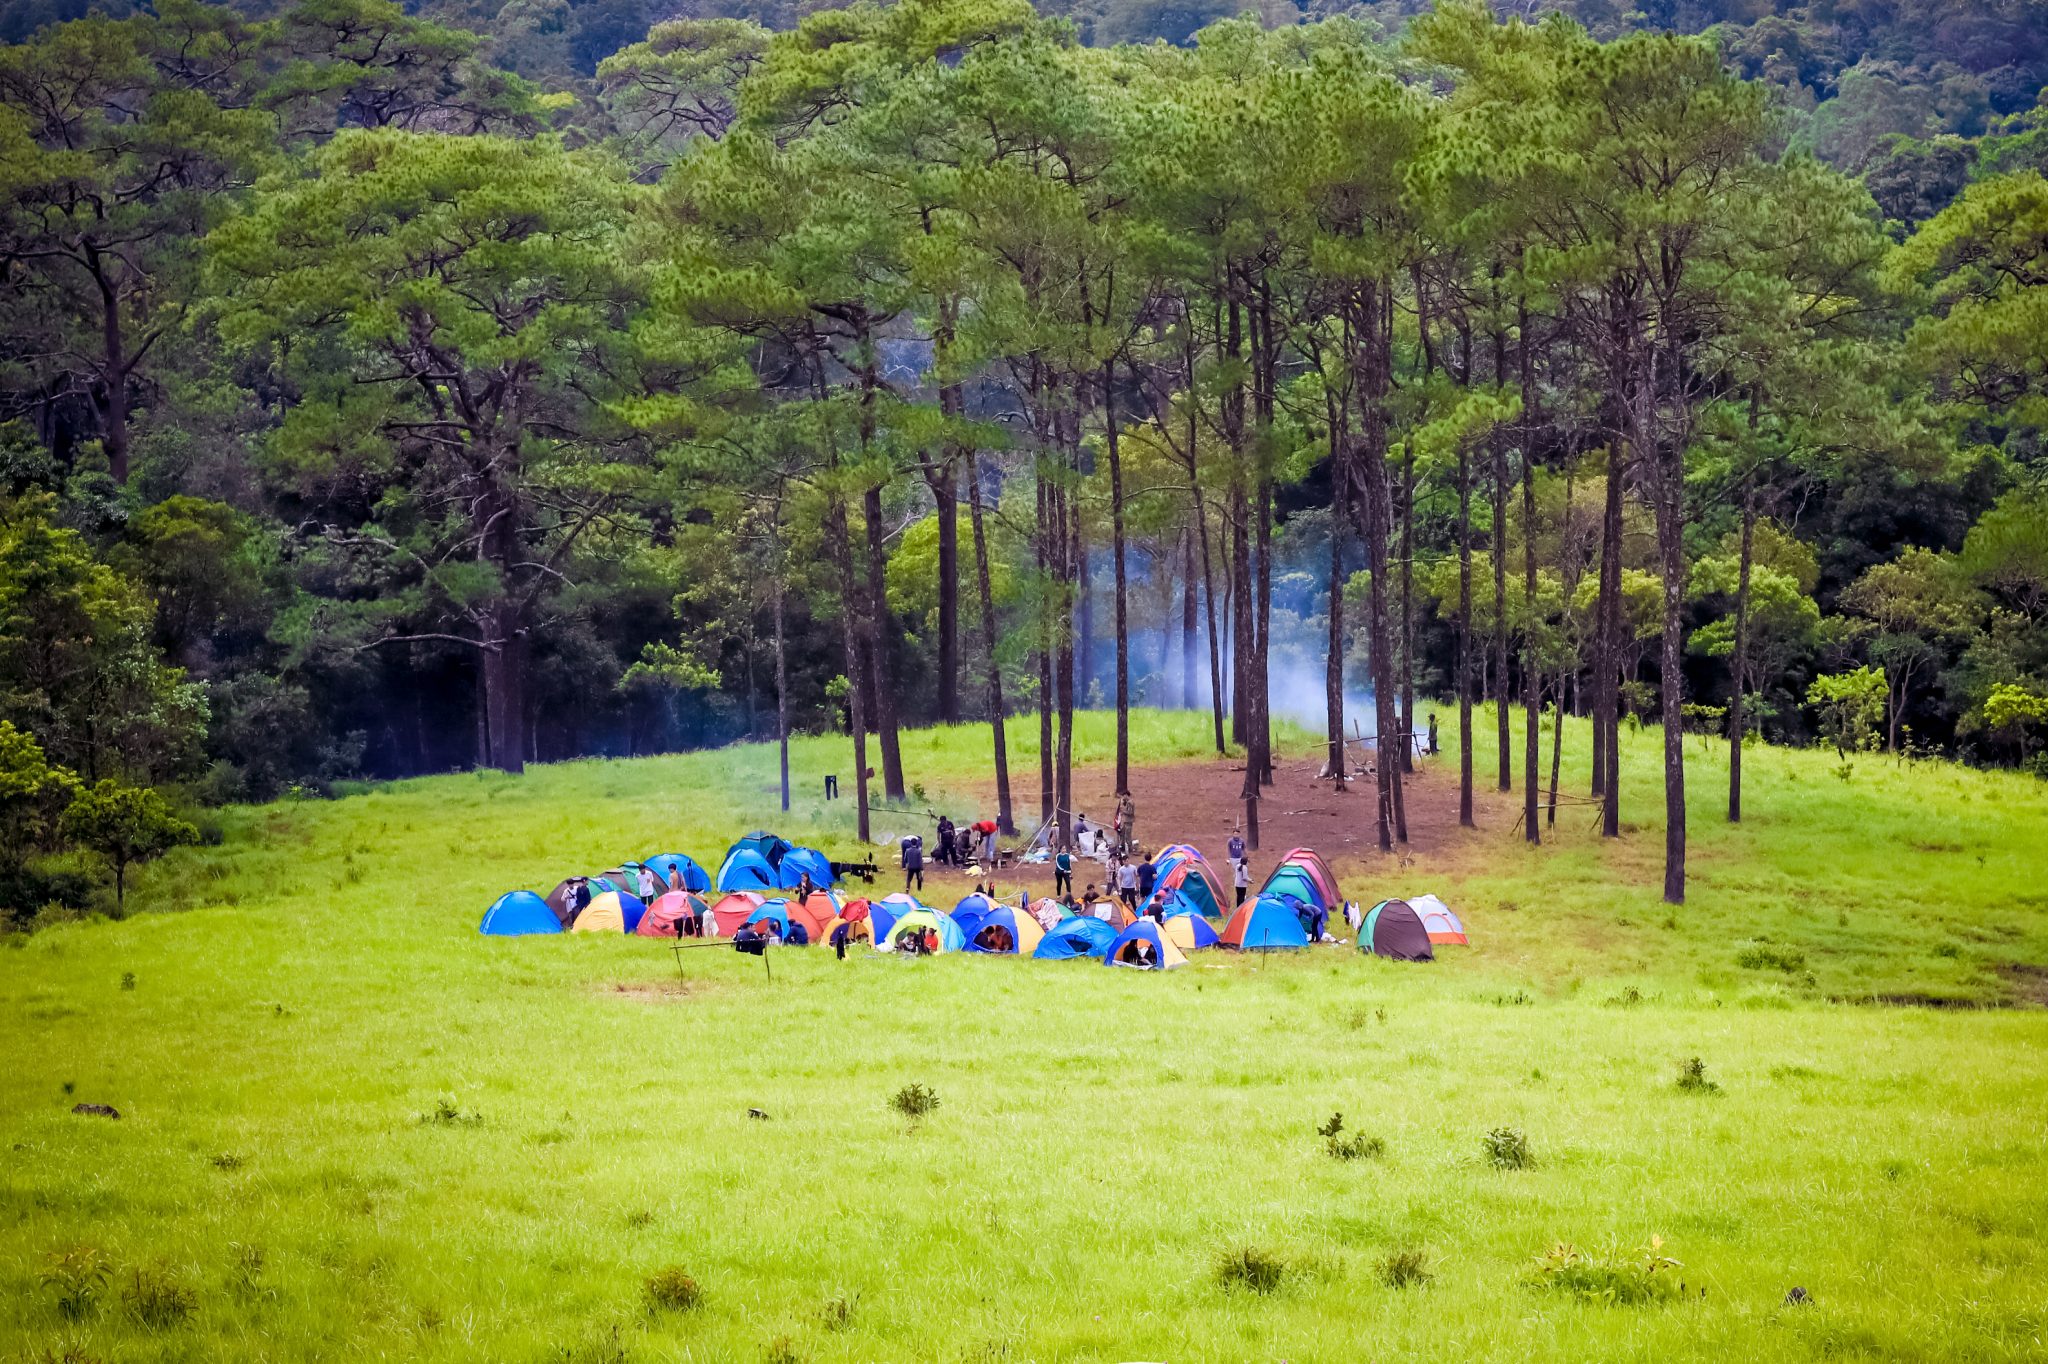 A campsite at Khnong Phsar, June 27, 2020. Luy Veasna